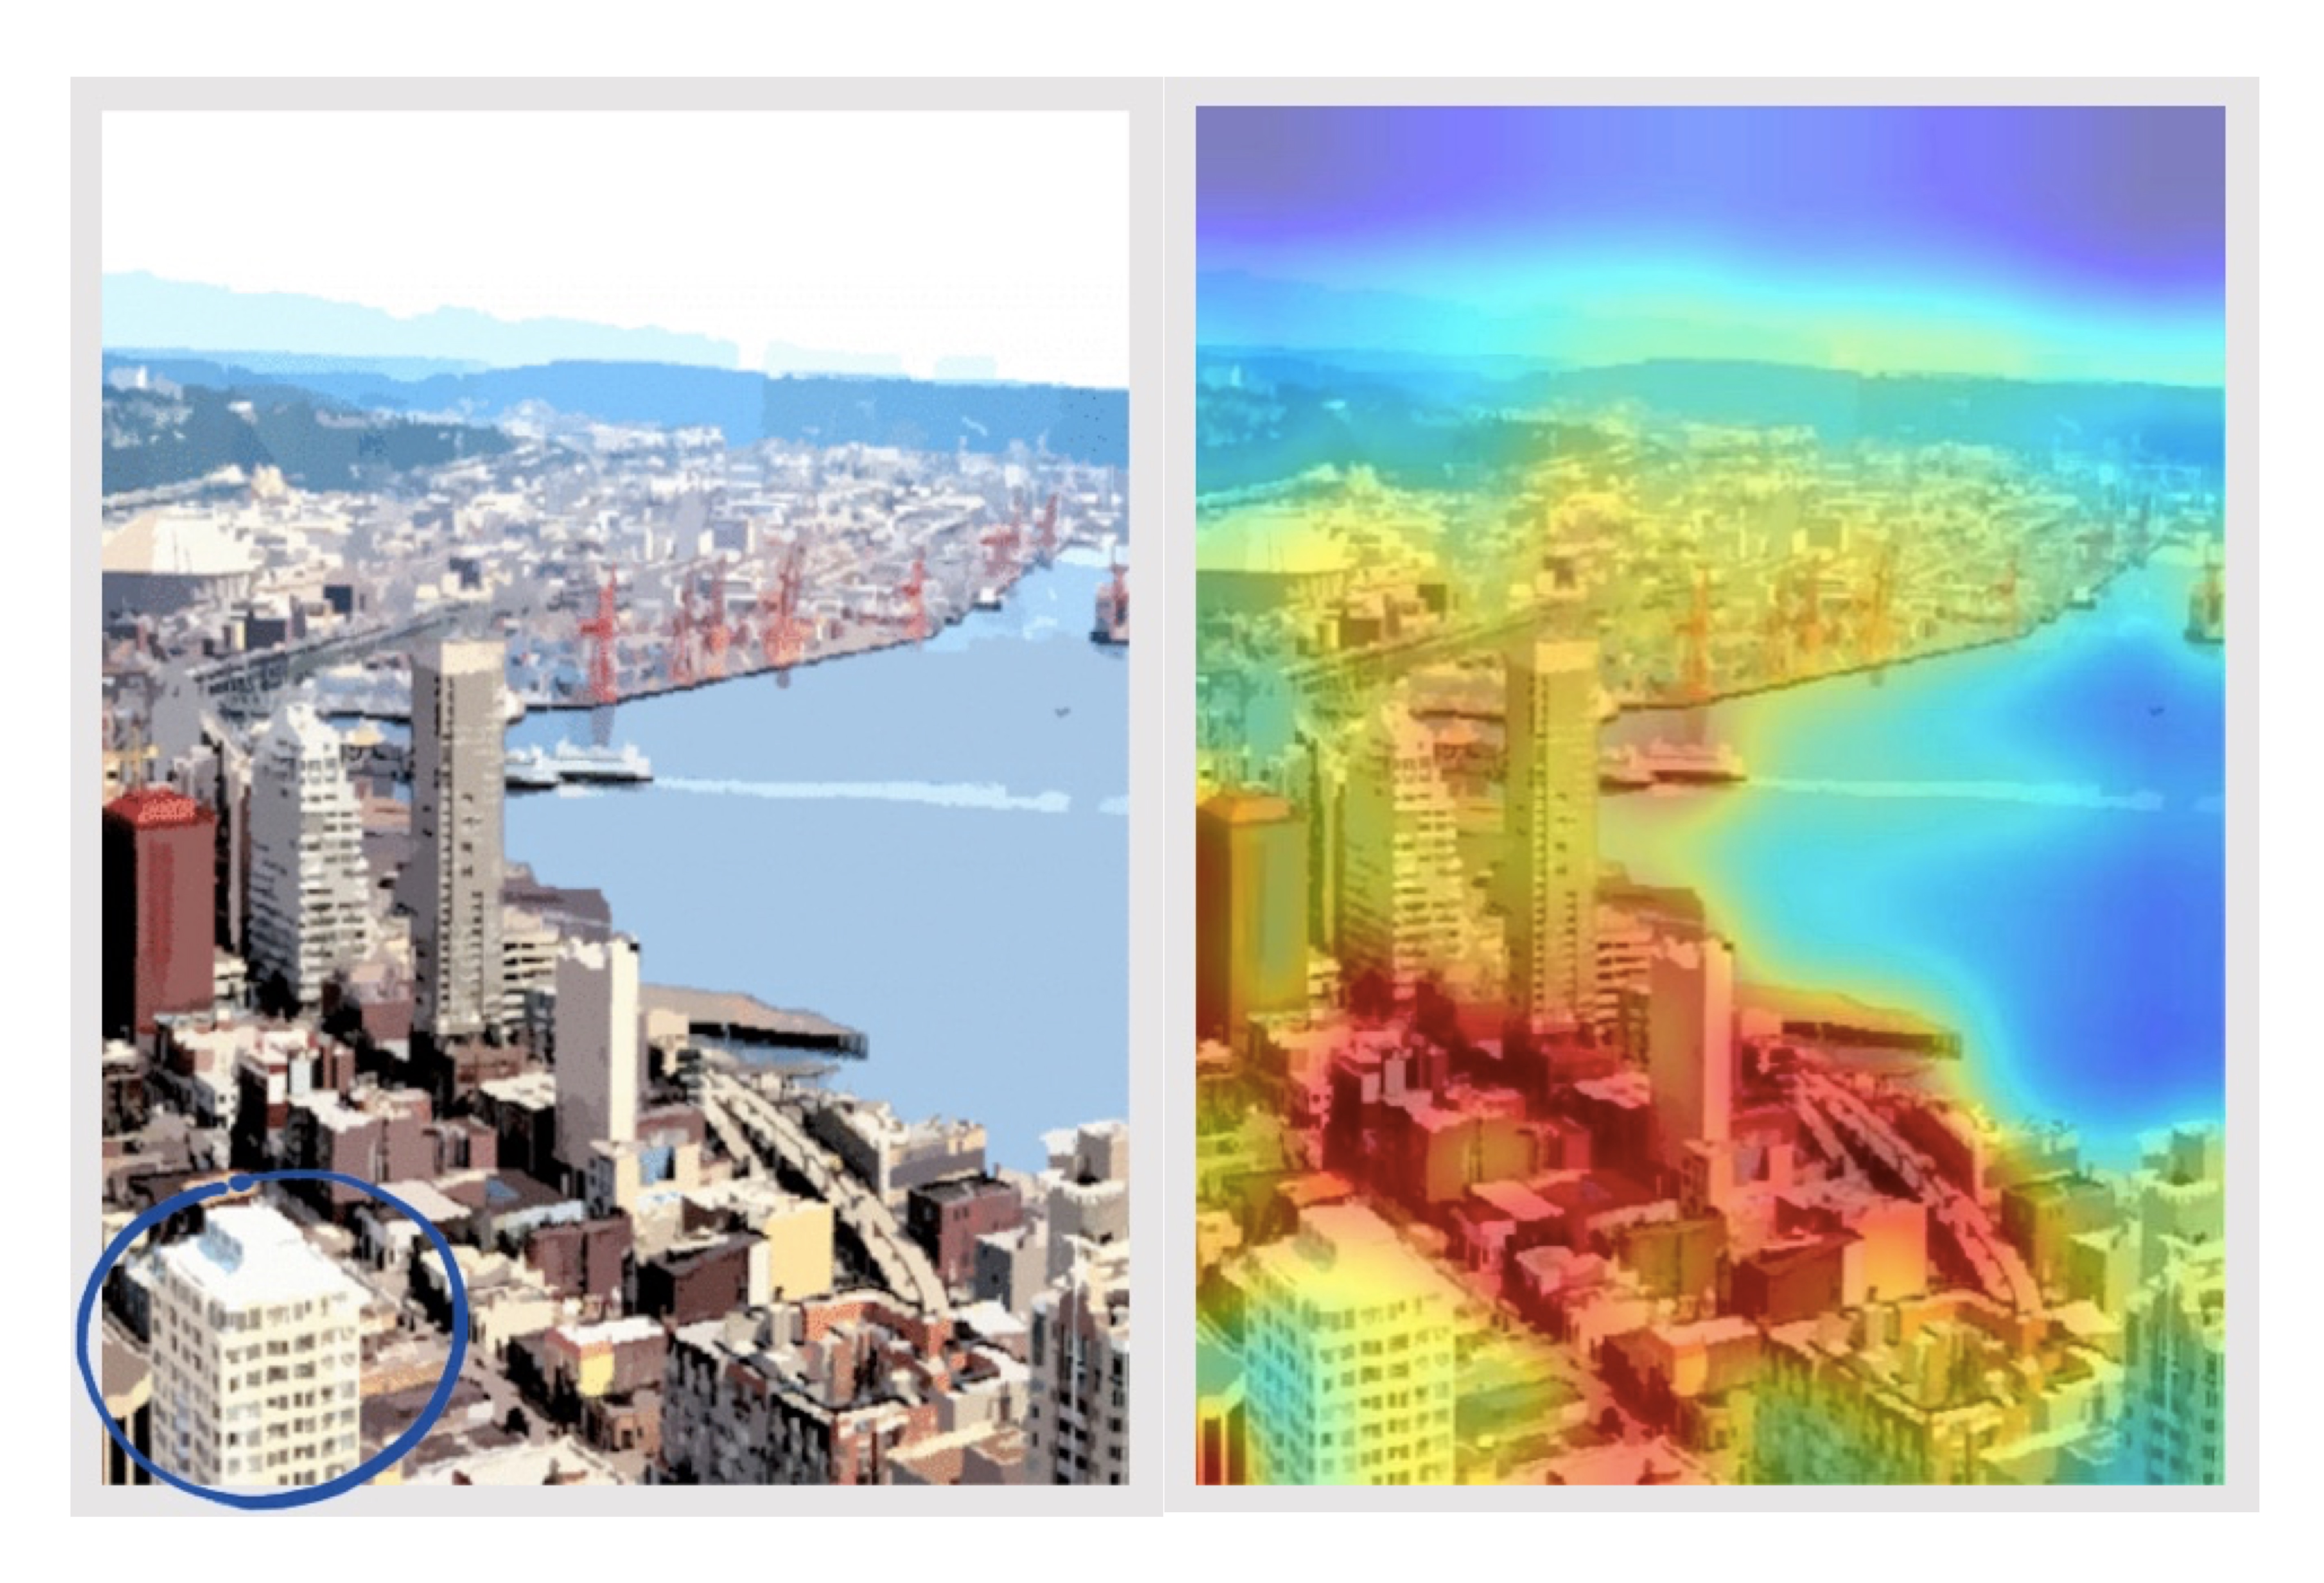 Spot the difference answer and saliency map for harbour image